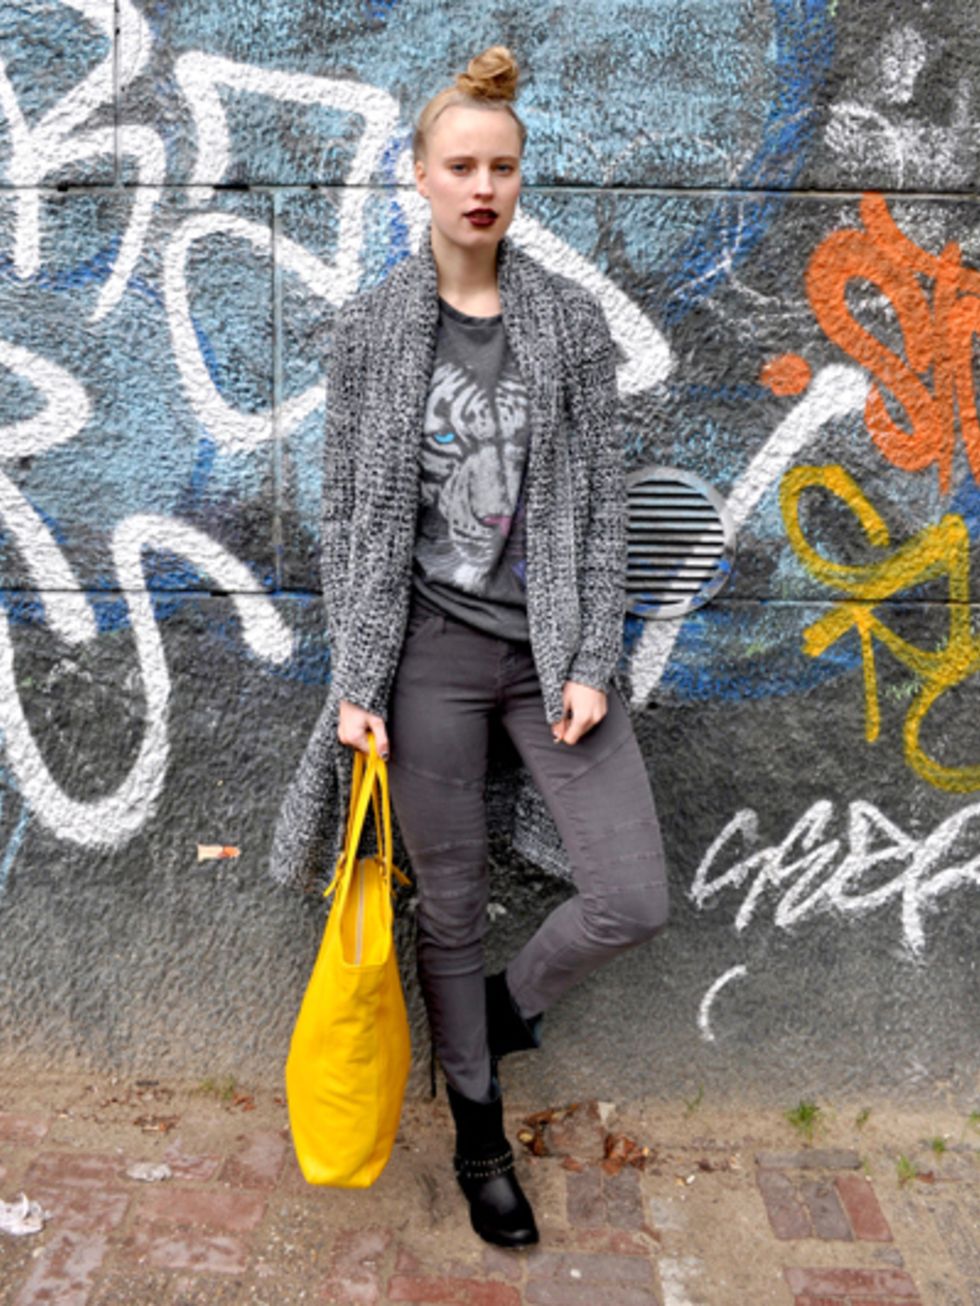 Clothing, Trousers, Outerwear, Style, Coat, Street fashion, Graffiti, Bag, Jacket, Cool, 